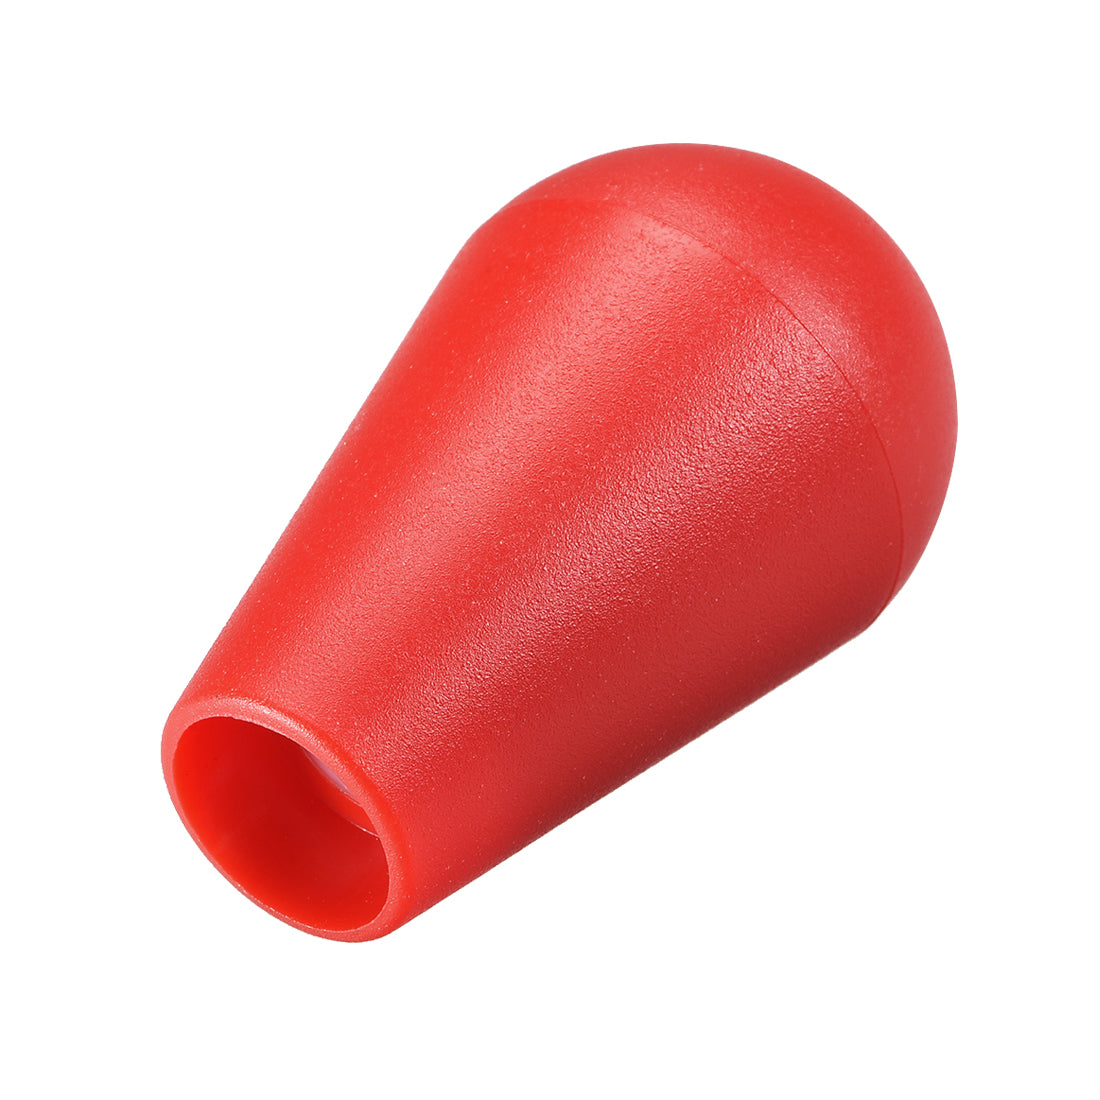 uxcell Uxcell Ellipse Oval Joystick Head Rocker Ball Top Handle American Type Arcade Game DIY Parts Replacement Red 2Pcs